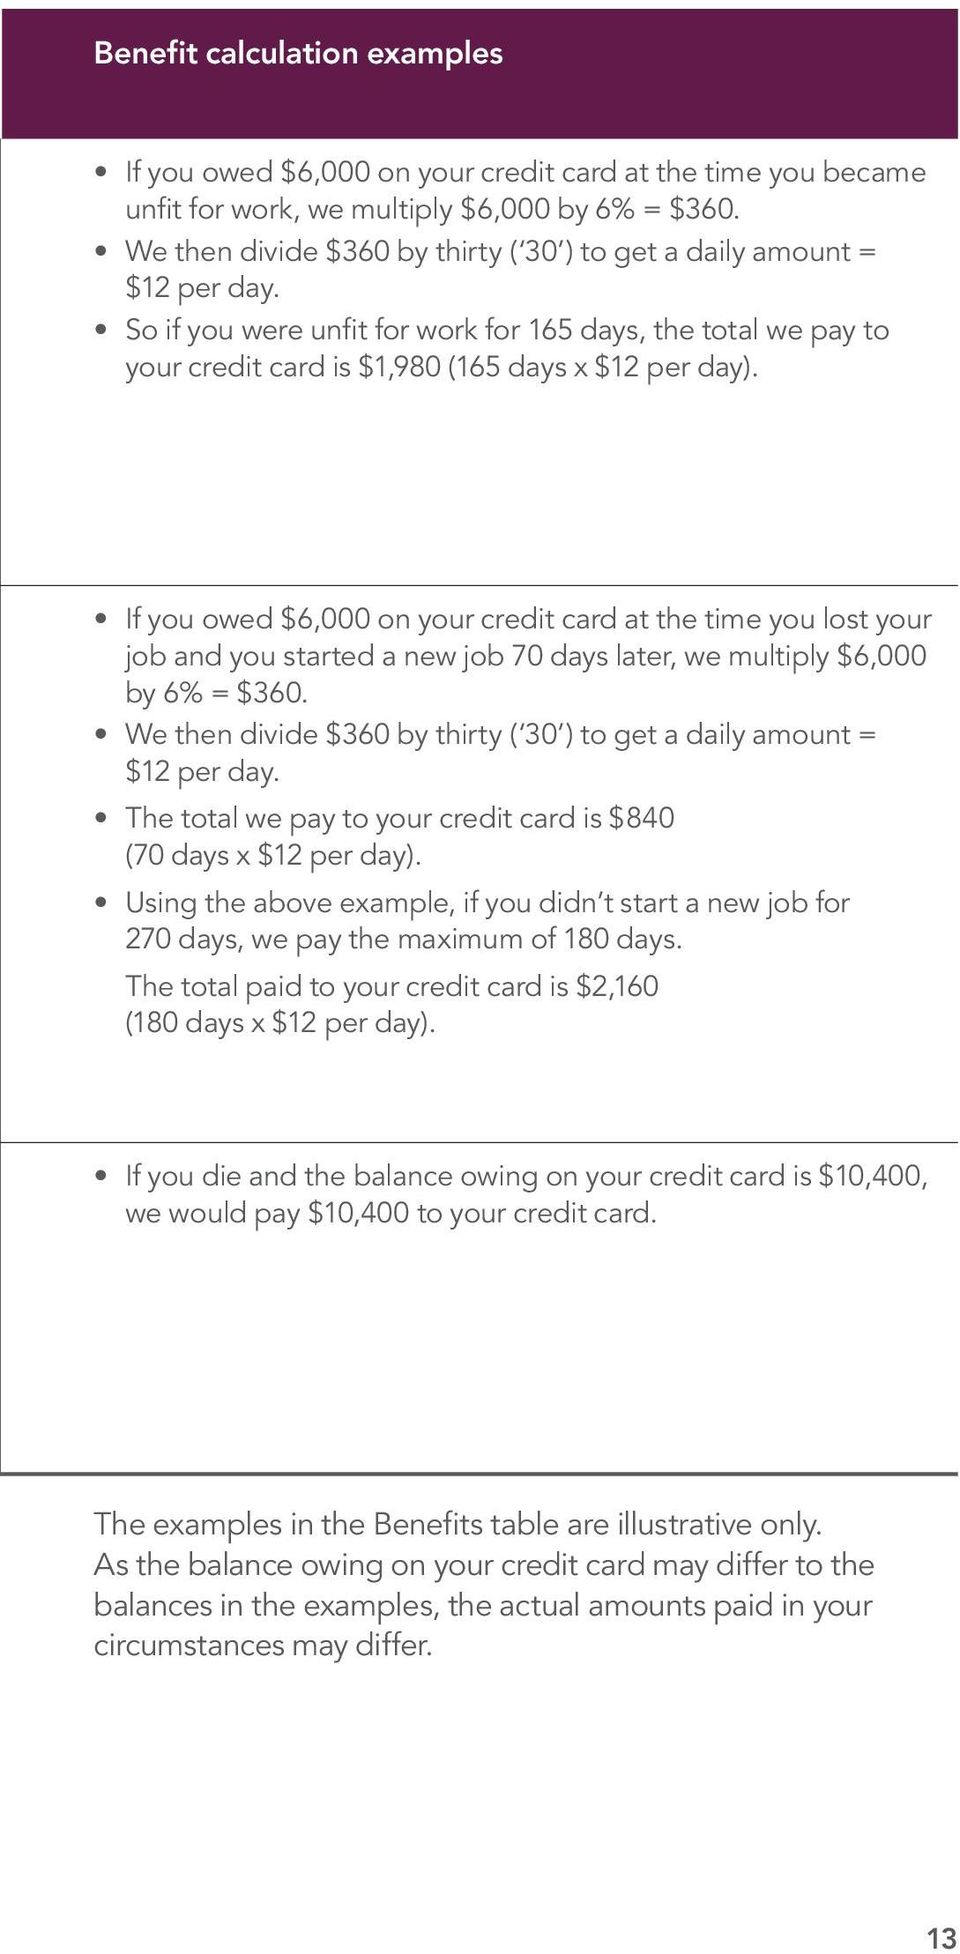 If you owed $6,000 on your credit card at the time you lost your job and you started a new job 70 days later, we multiply $6,000 by 6% = $360.